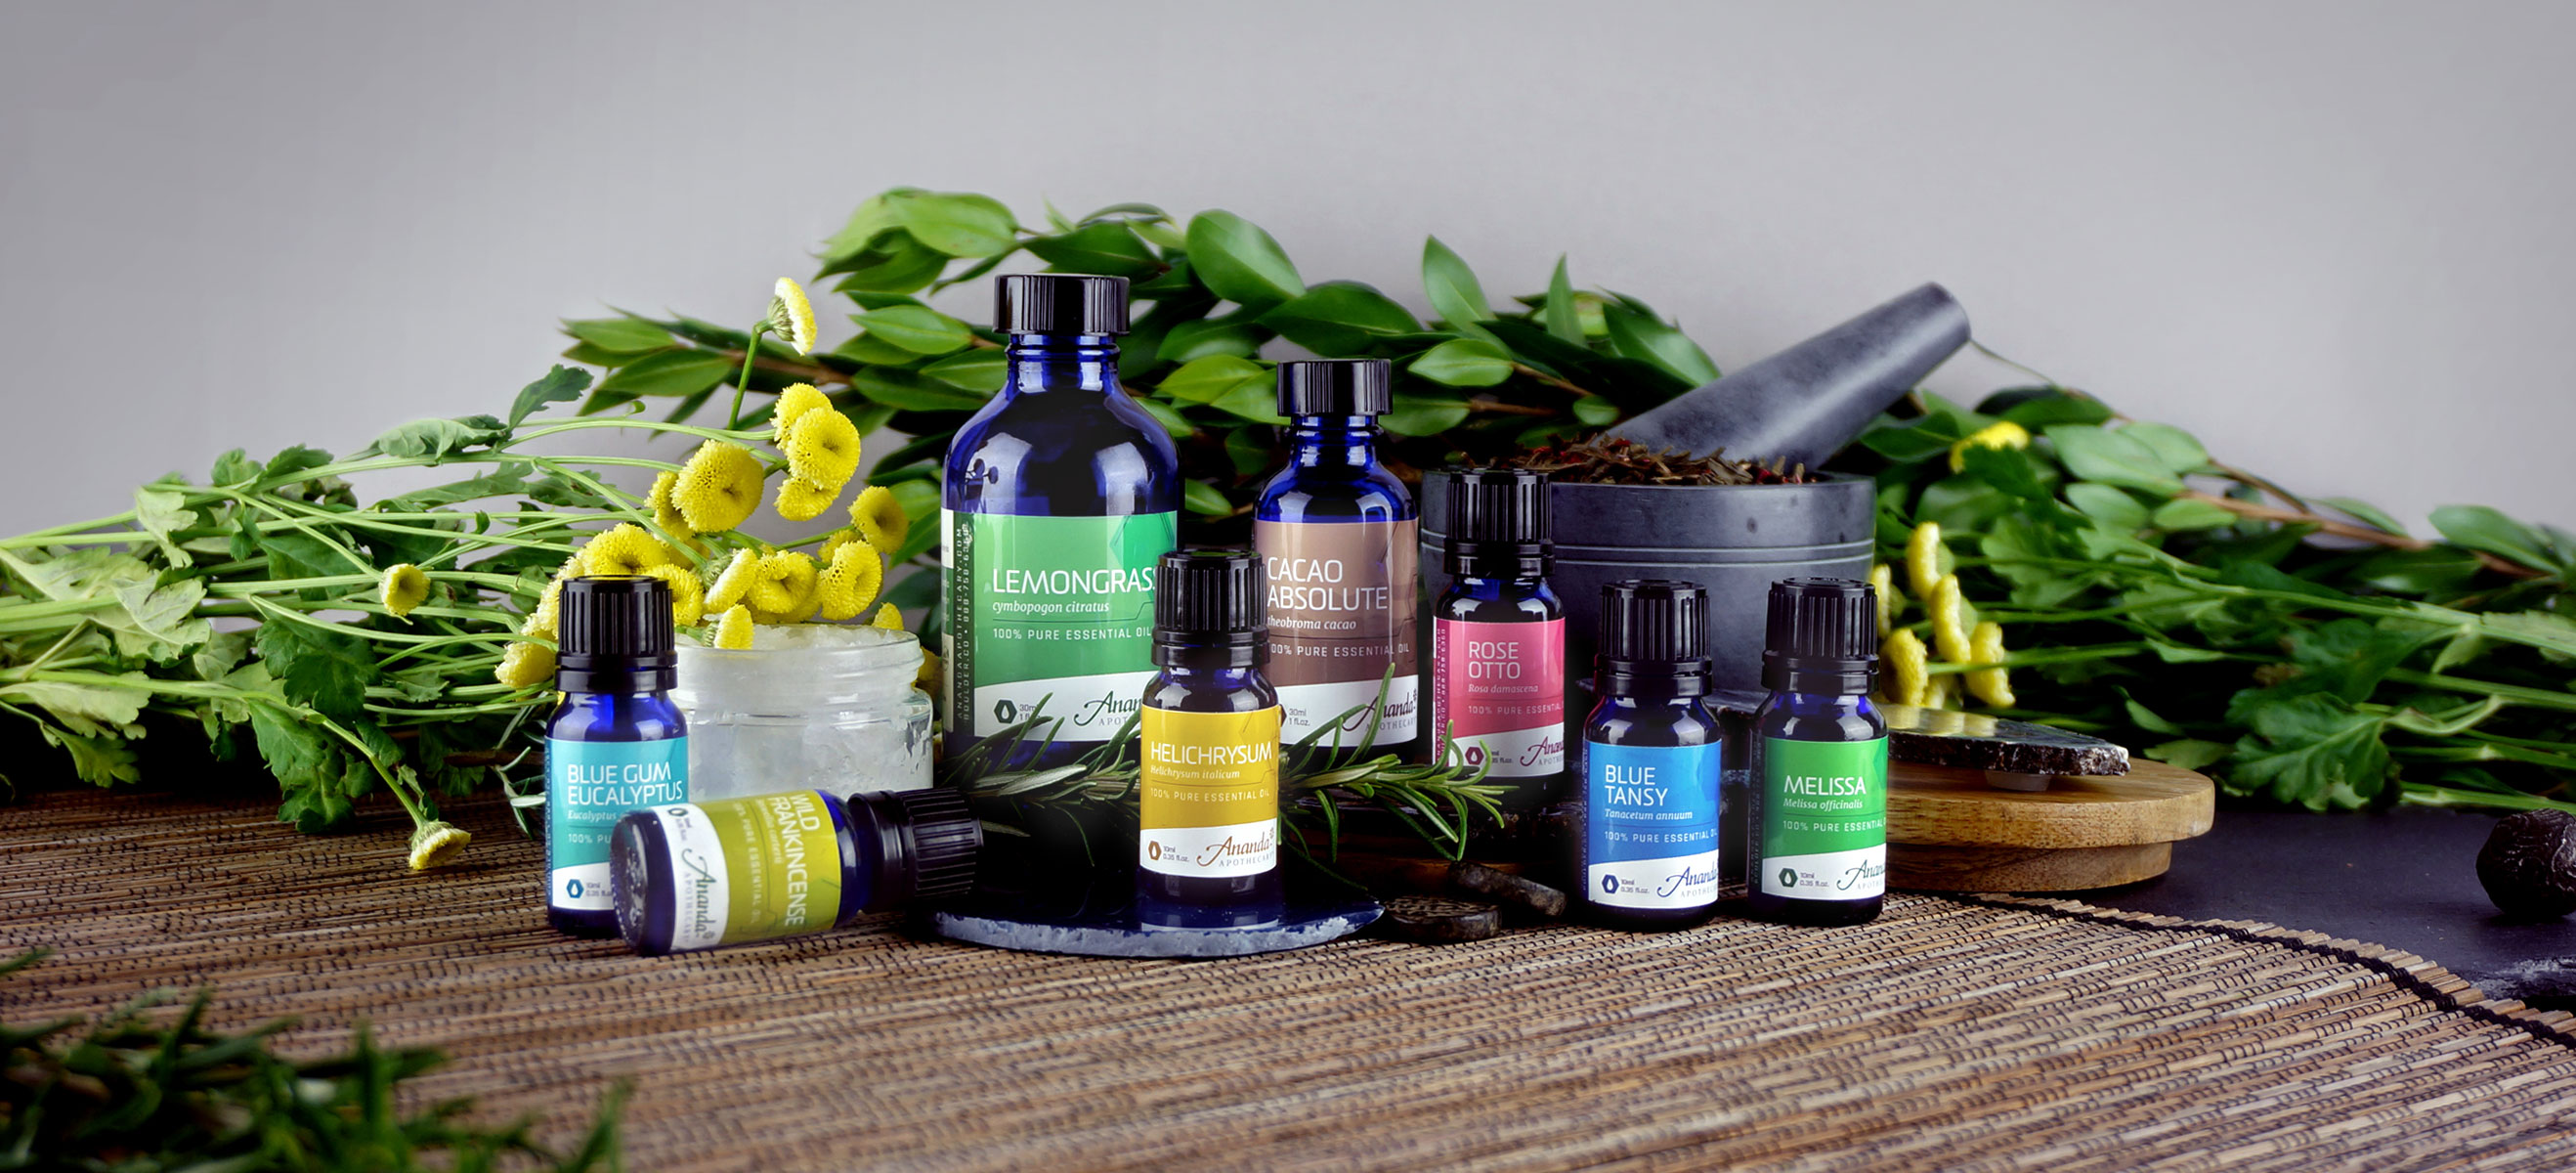 Ananda Apothecary: Website, Labels, & Photography